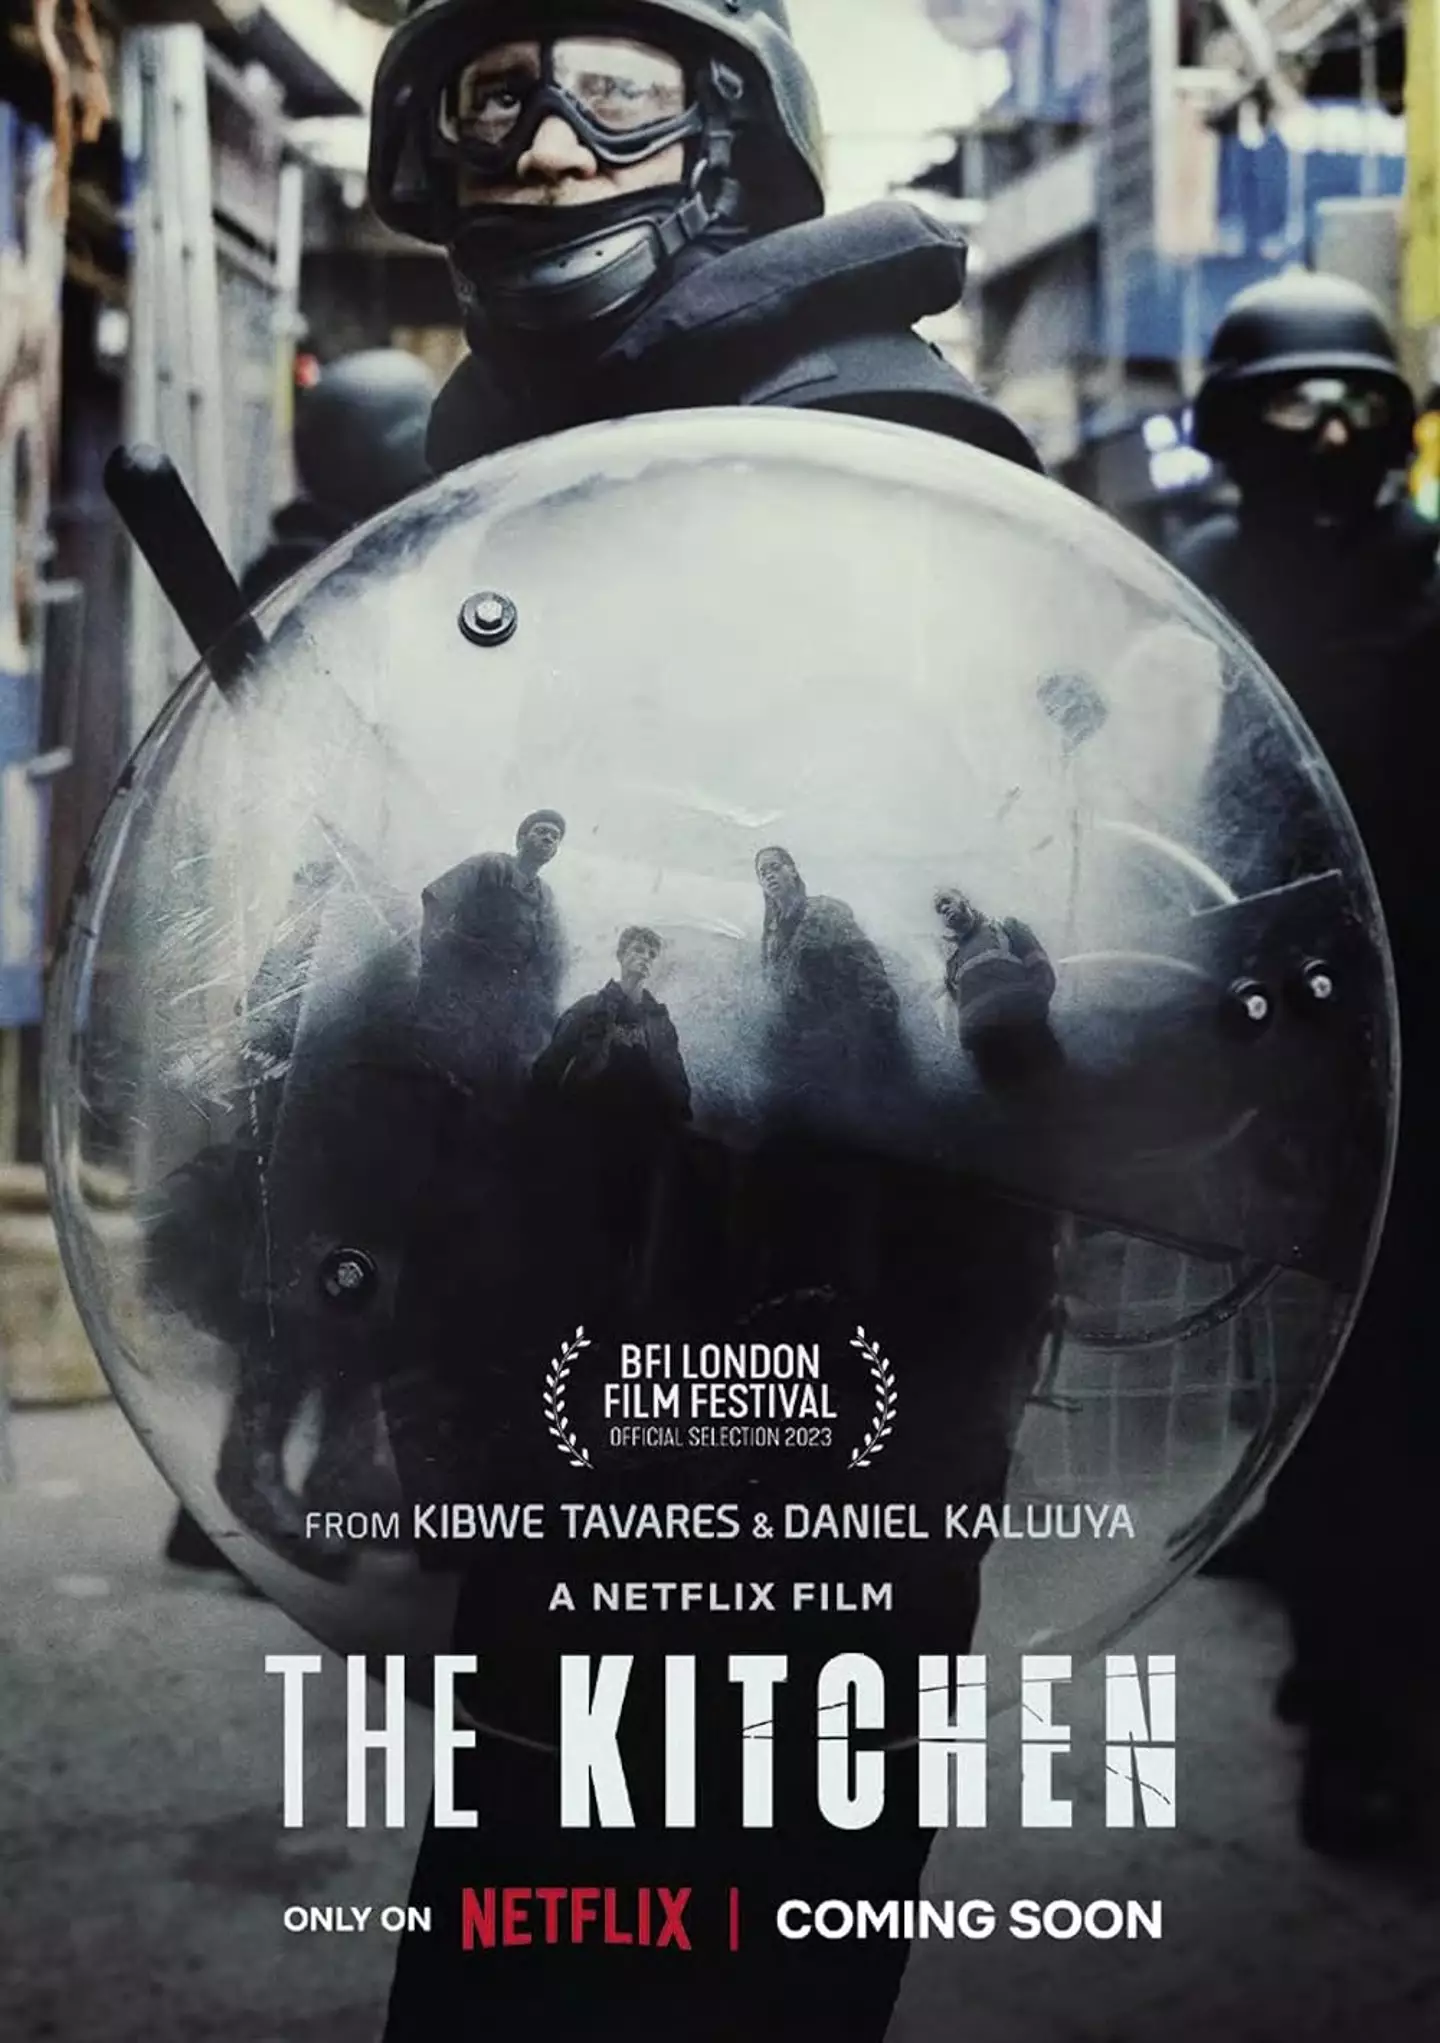 The Kitchen will drop on Netflix this January.